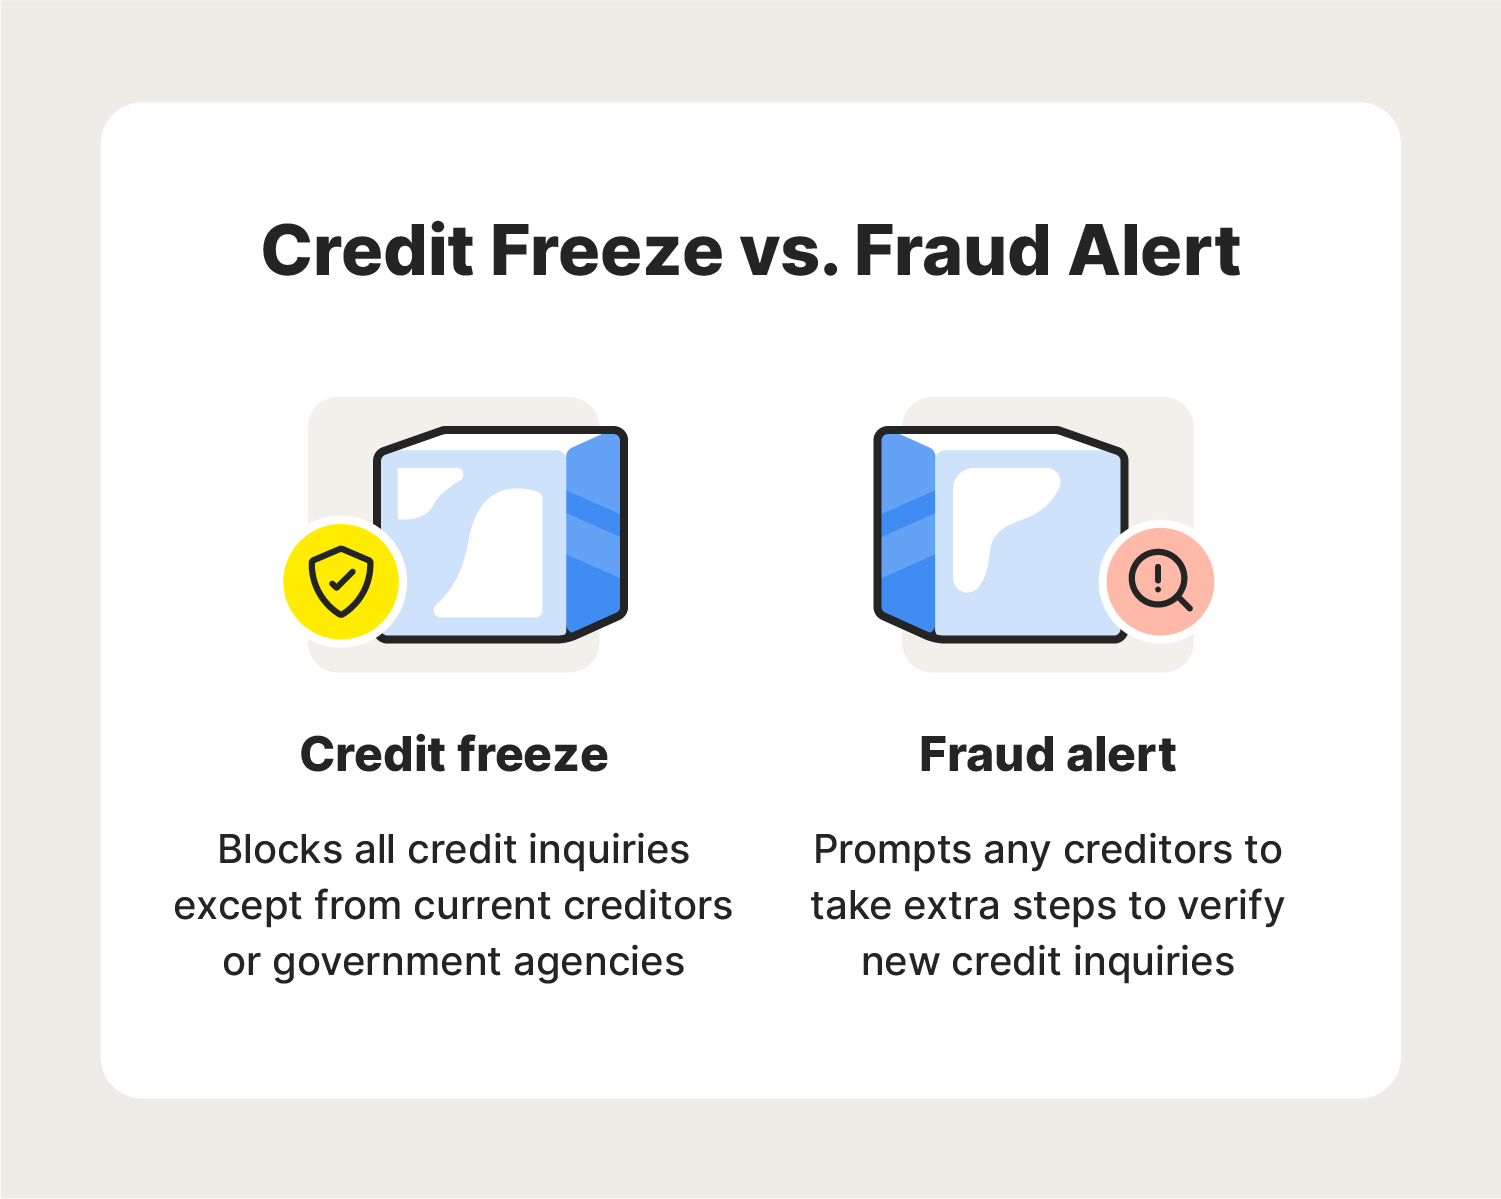 An image covers the key differences between a credit freeze and a fraud alert.